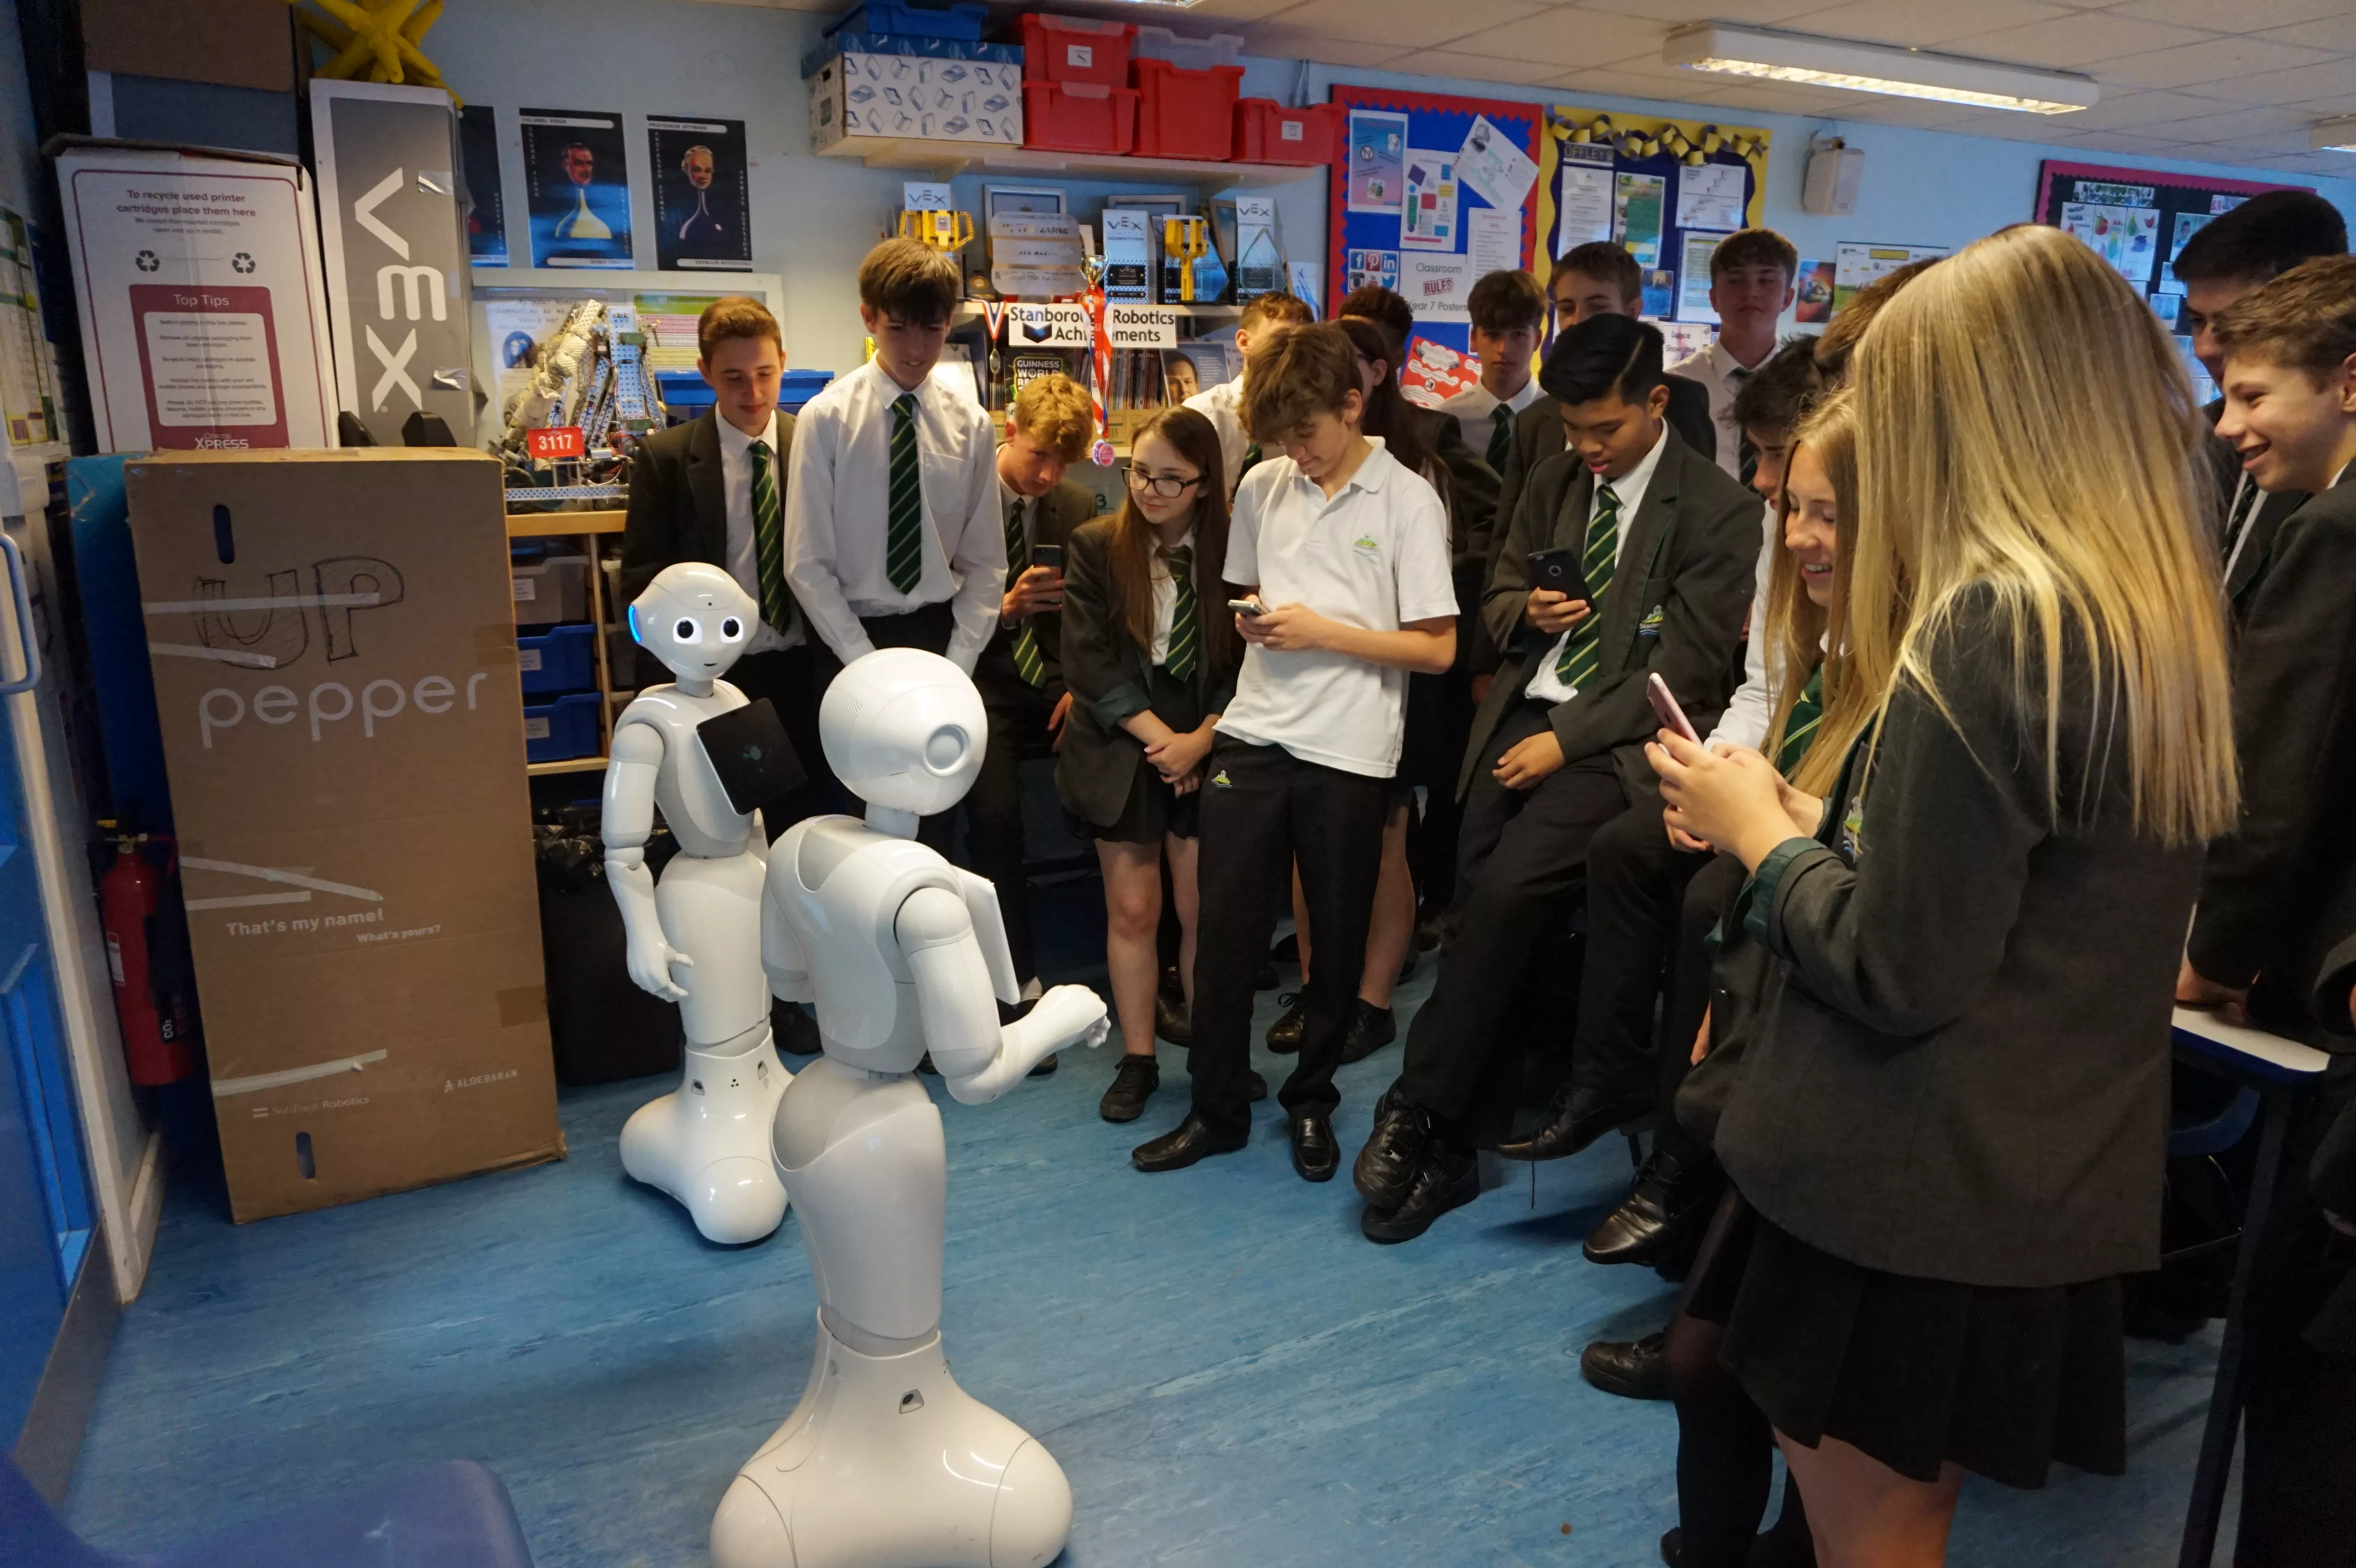 Pupils interacting with the Pepper robot